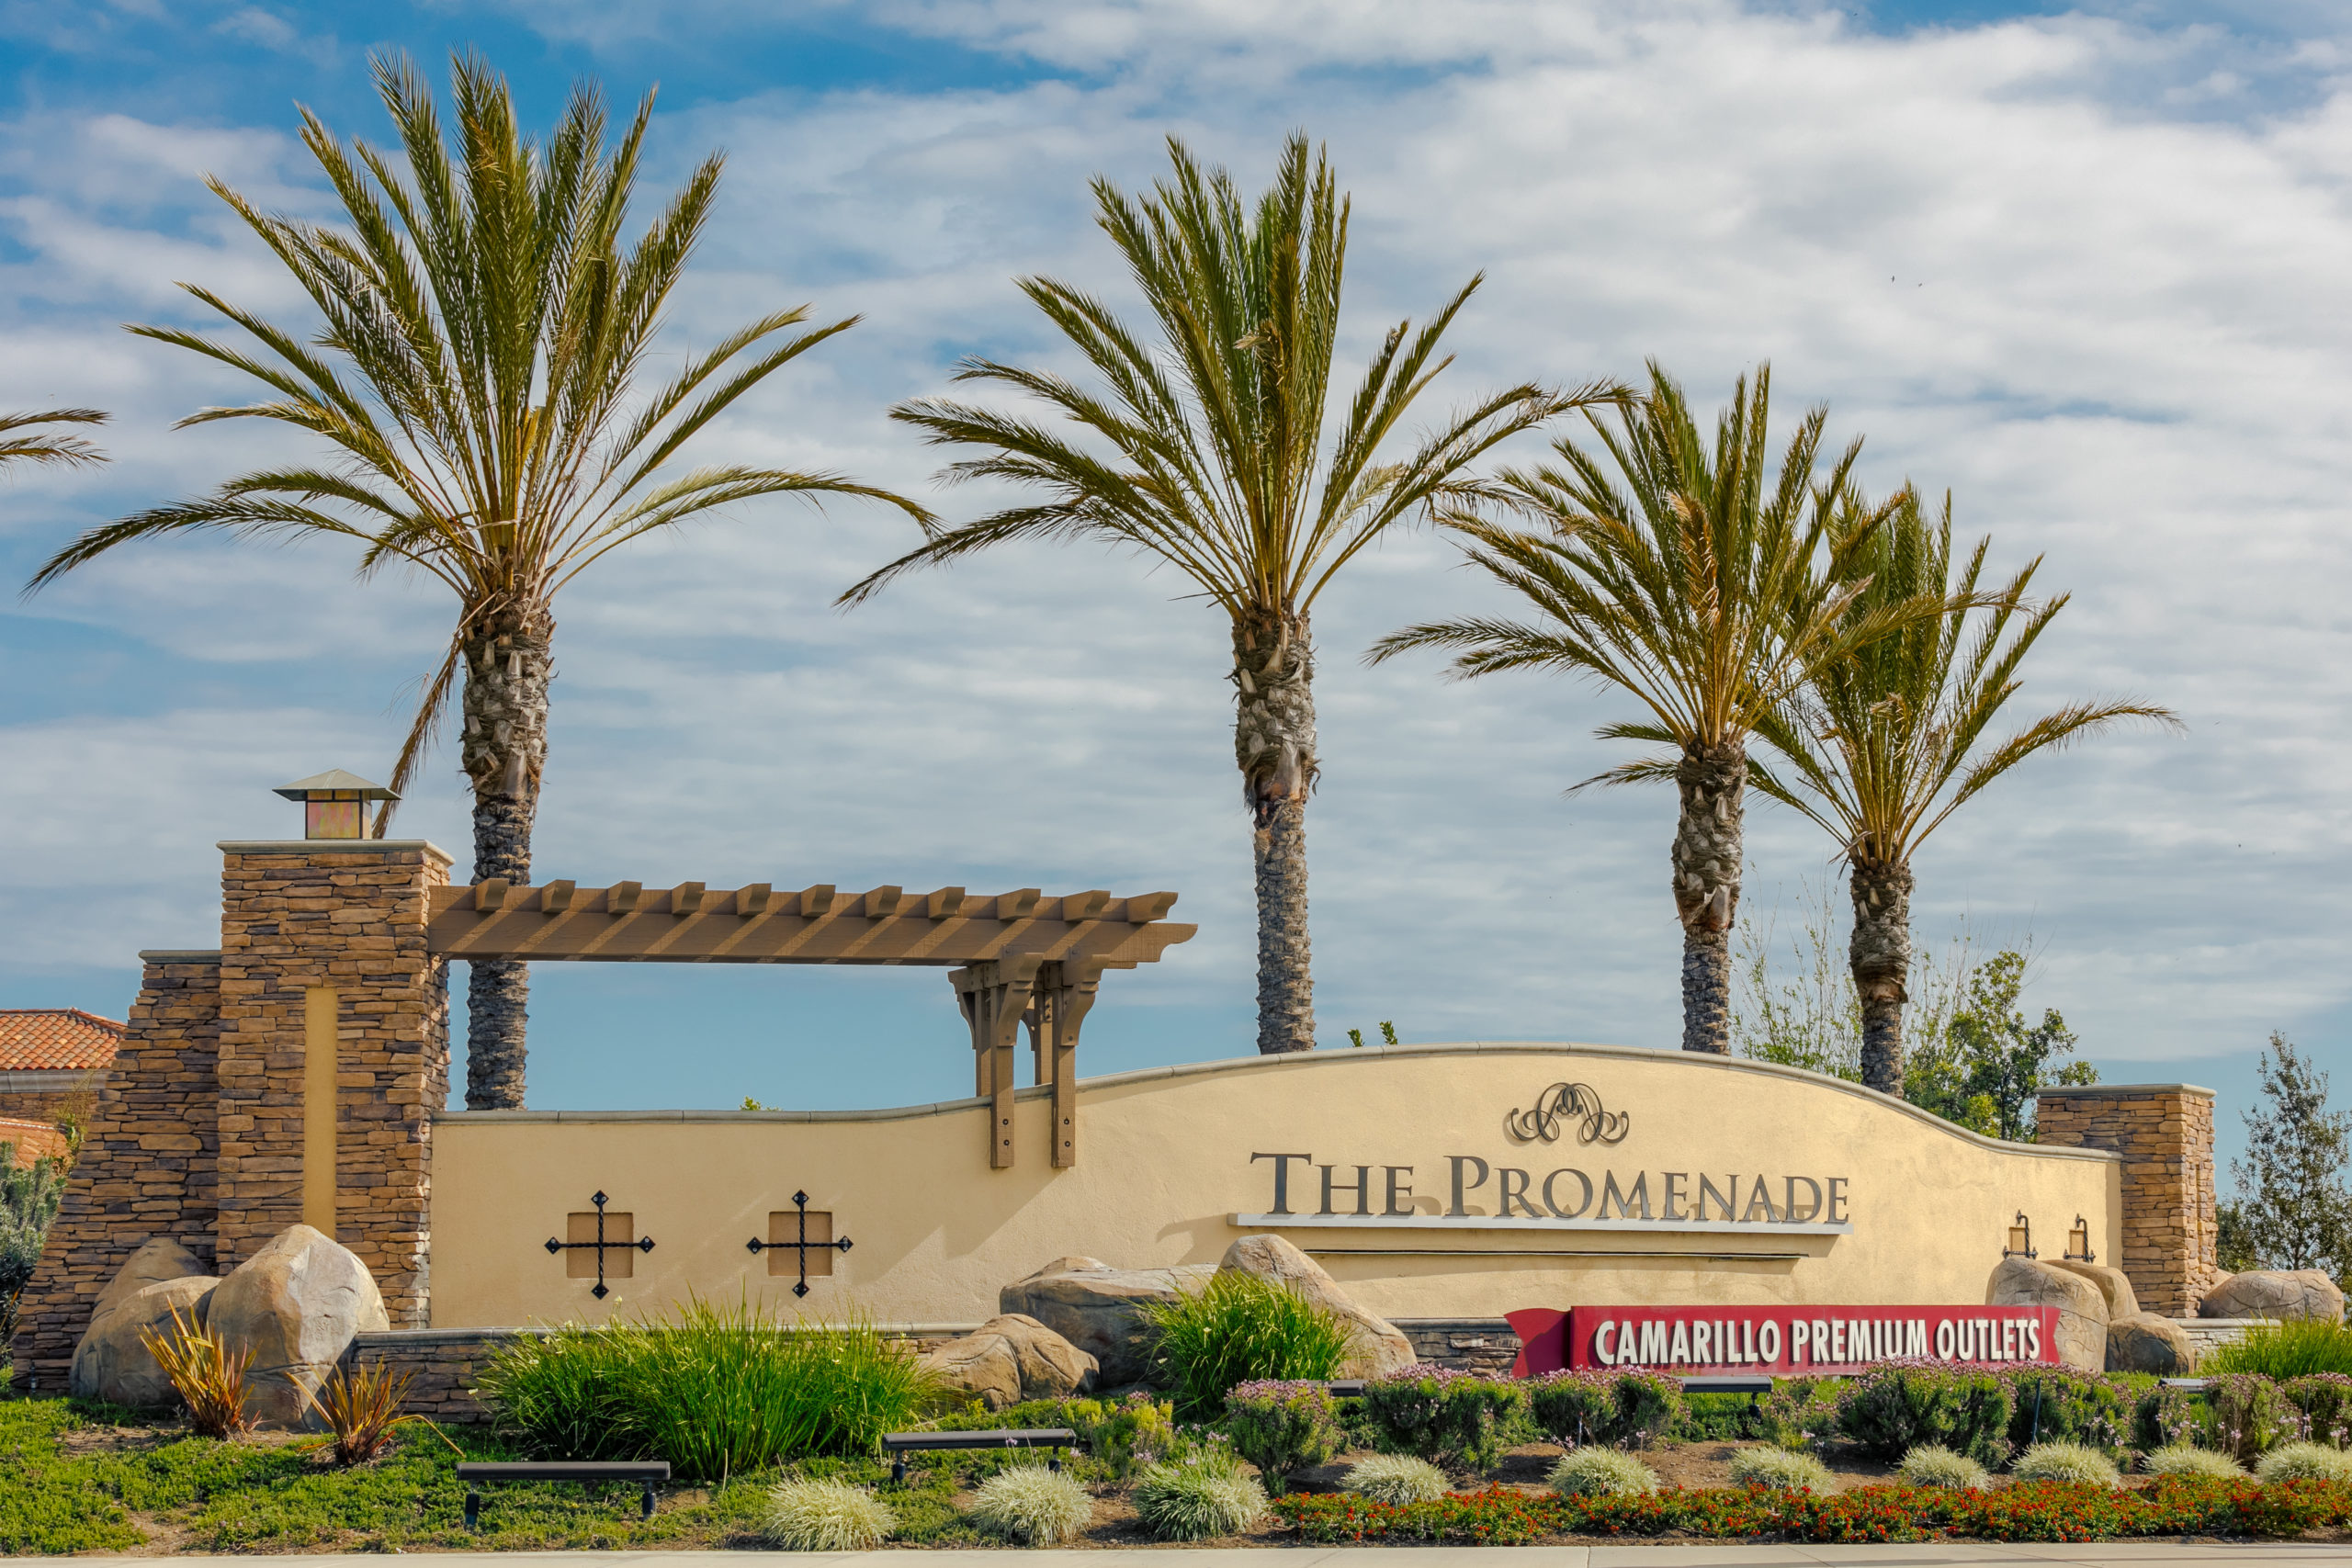 The Camarillo Premium Outlets Are Back and Better than Ever Visit Camarillo